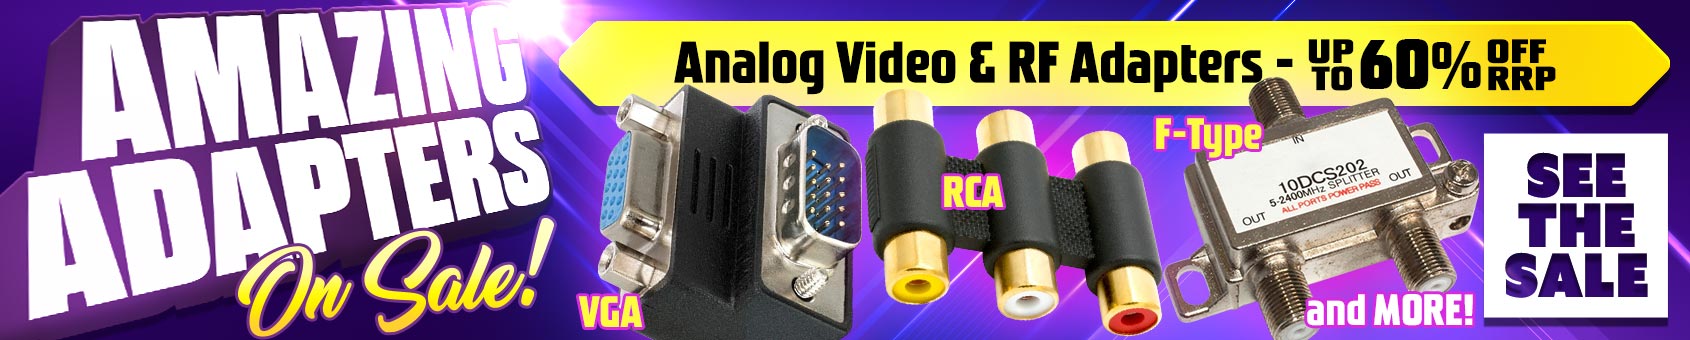 Our BIGGEST SALE EVER on Analogue AV Adapters during April!!!